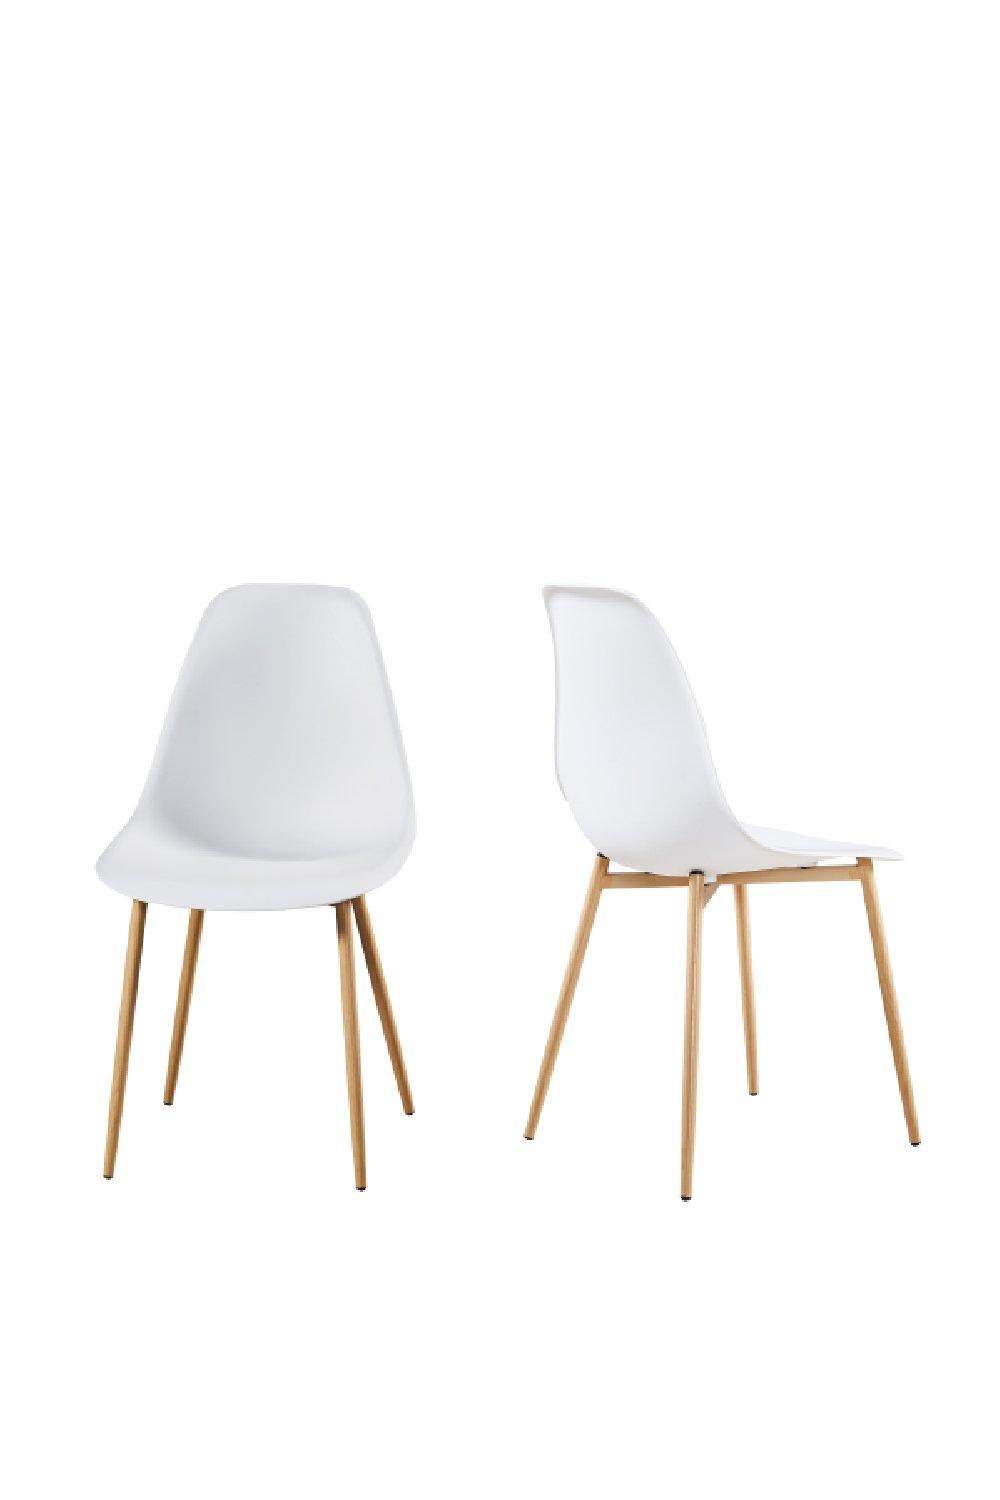 Astrid Dining Chair- Set of 2